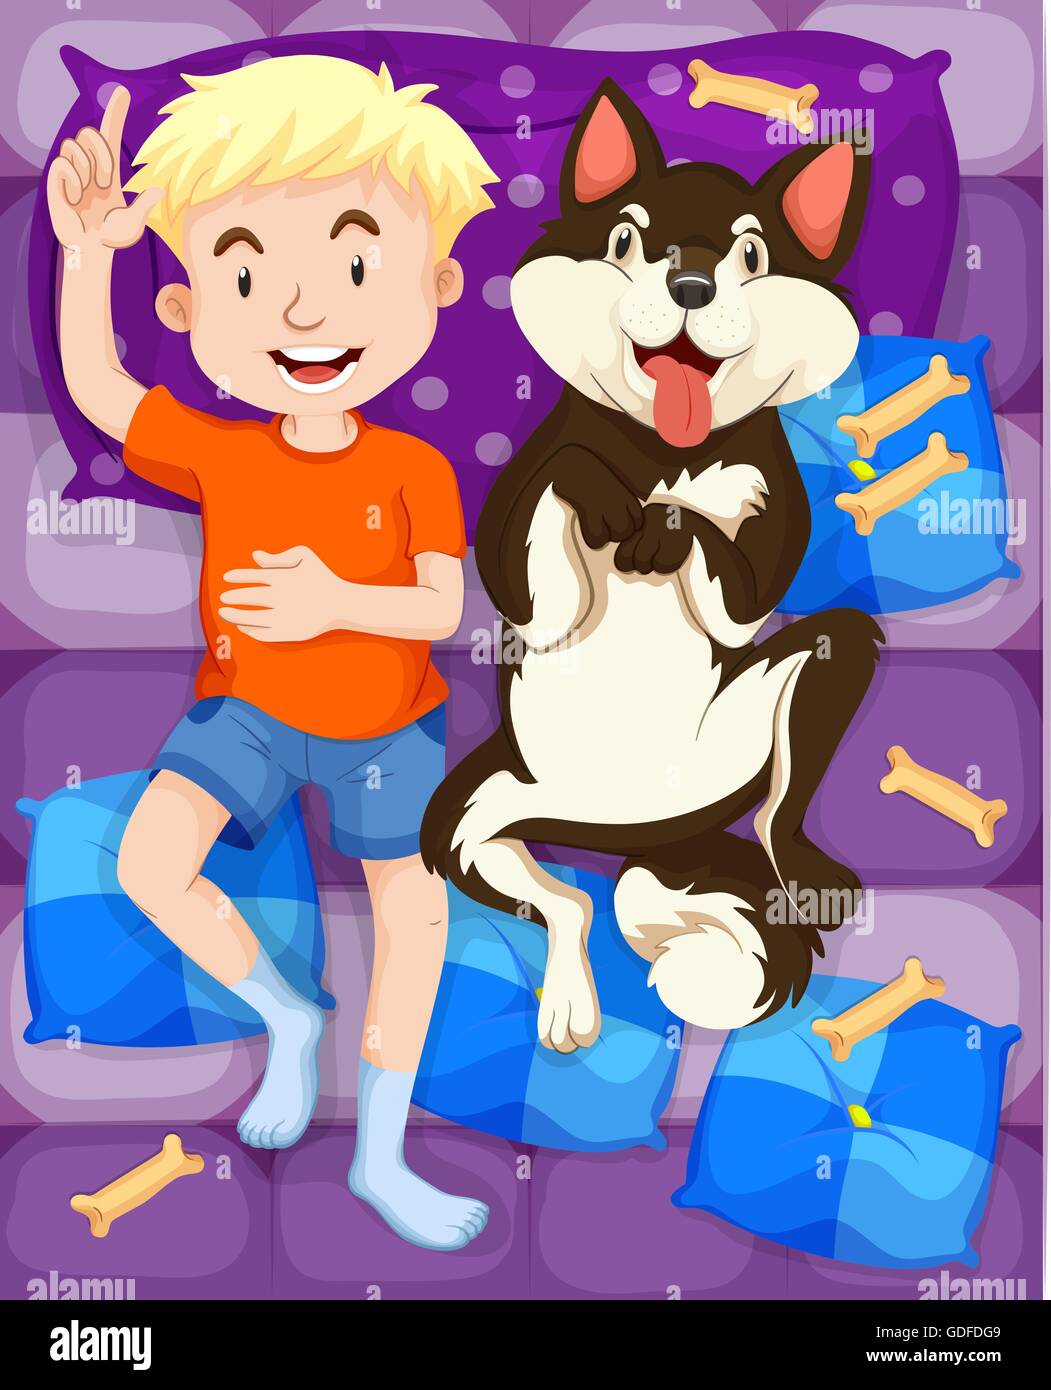 Boy sleeping with dog in bed illustration Stock Vector